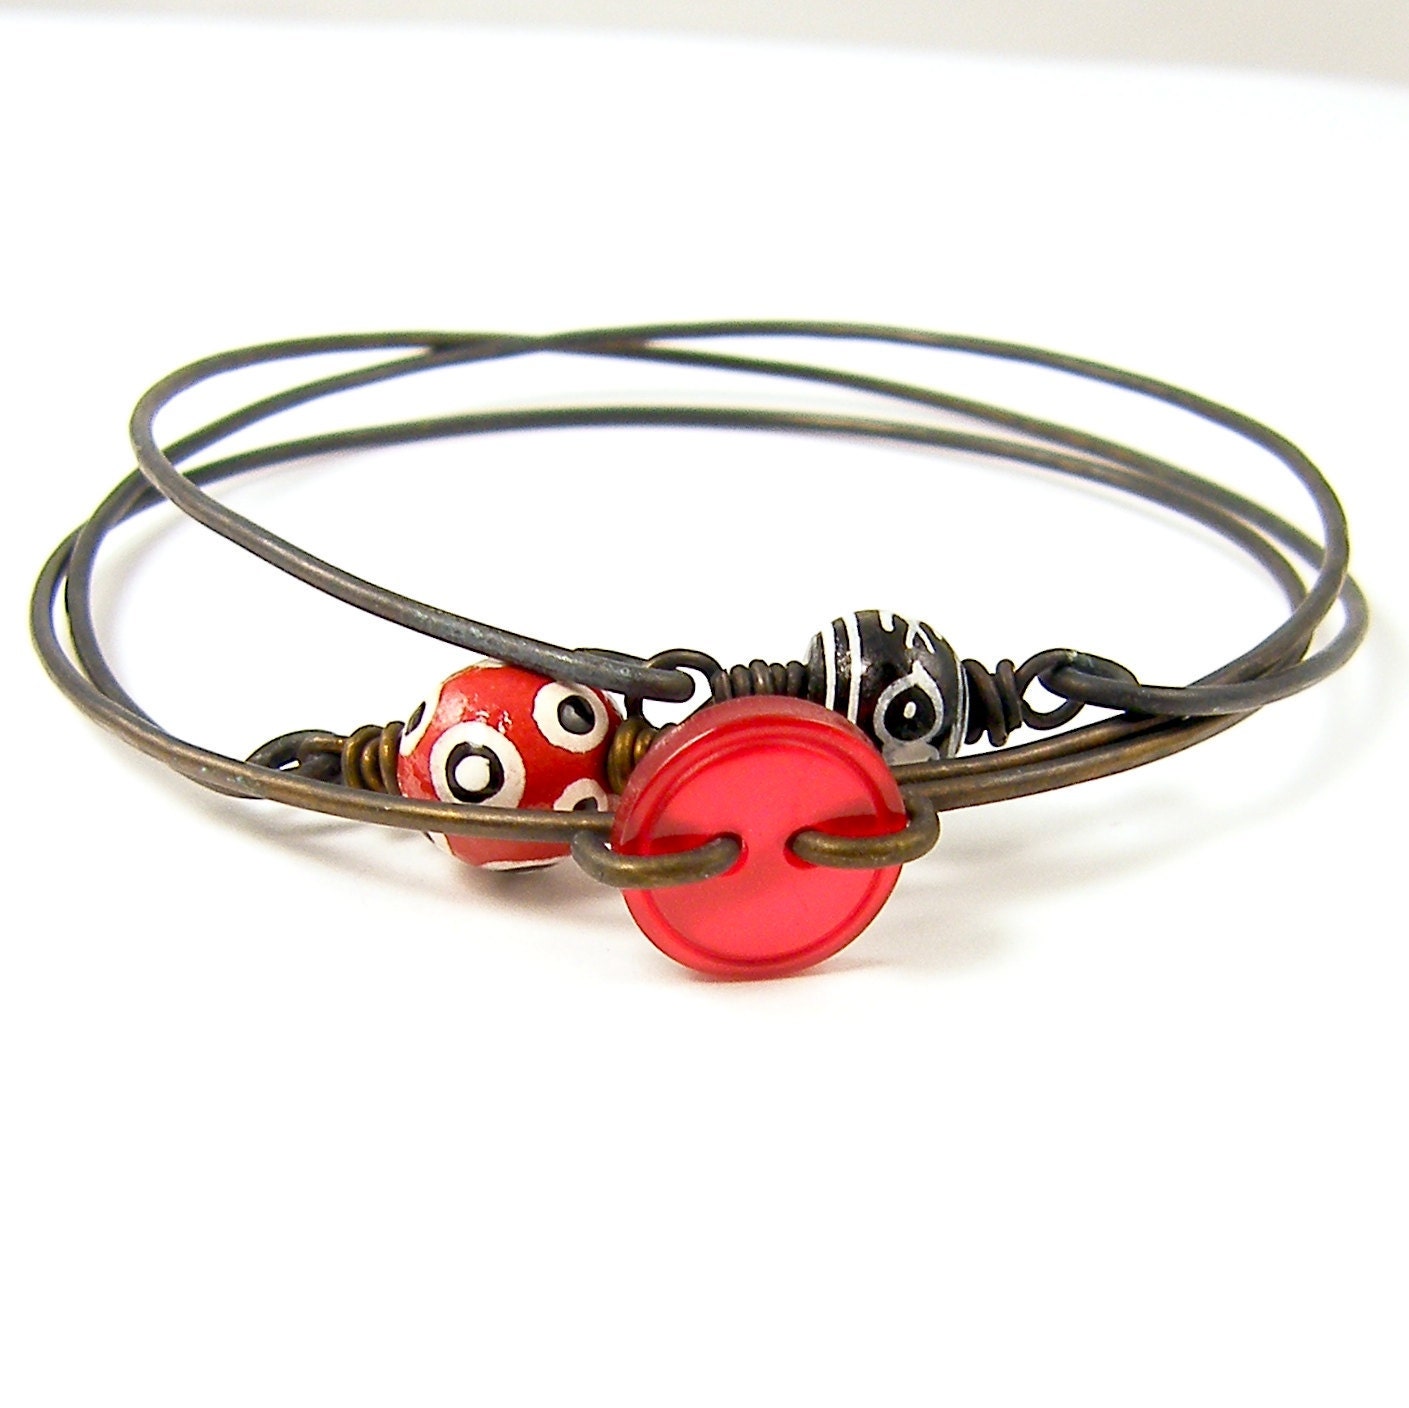 Stacking Bangles Red Black White Stacking Bangle Bracelets - Dark Brass Wire Red Button Polka Dot Bead Stackable Stacked Jewelry